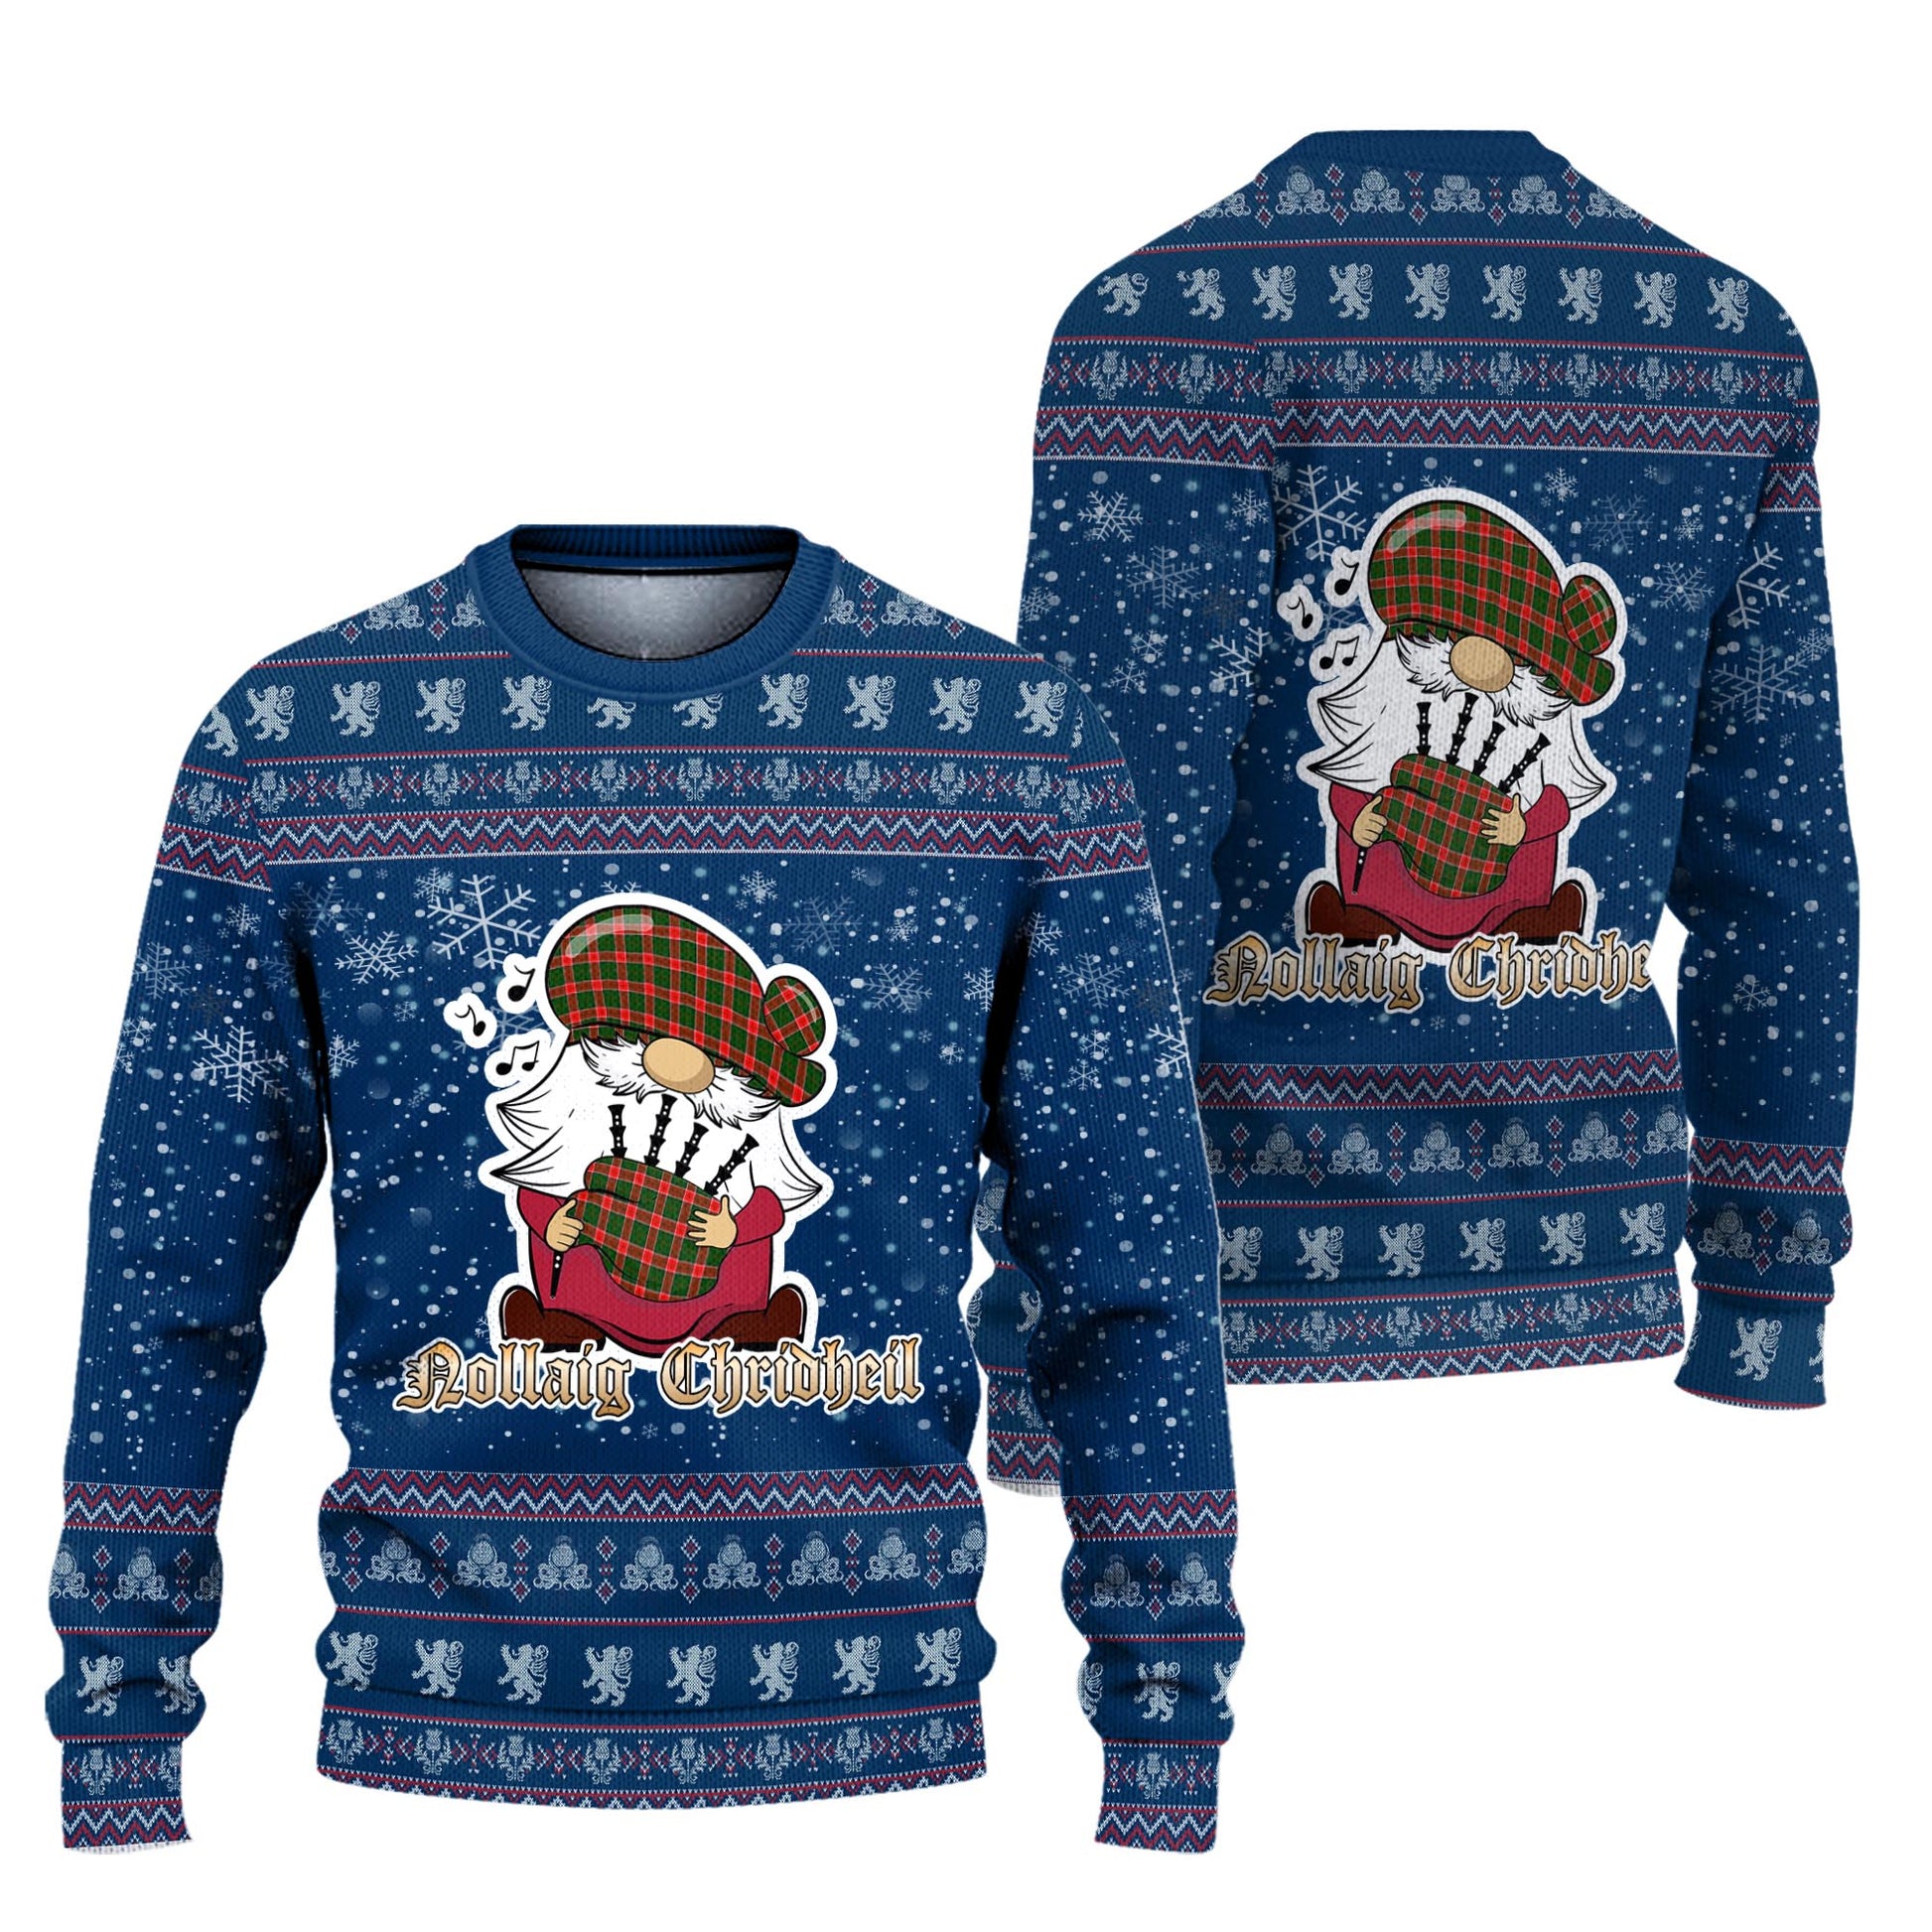 Pollock Modern Clan Christmas Family Knitted Sweater with Funny Gnome Playing Bagpipes Unisex Blue - Tartanvibesclothing